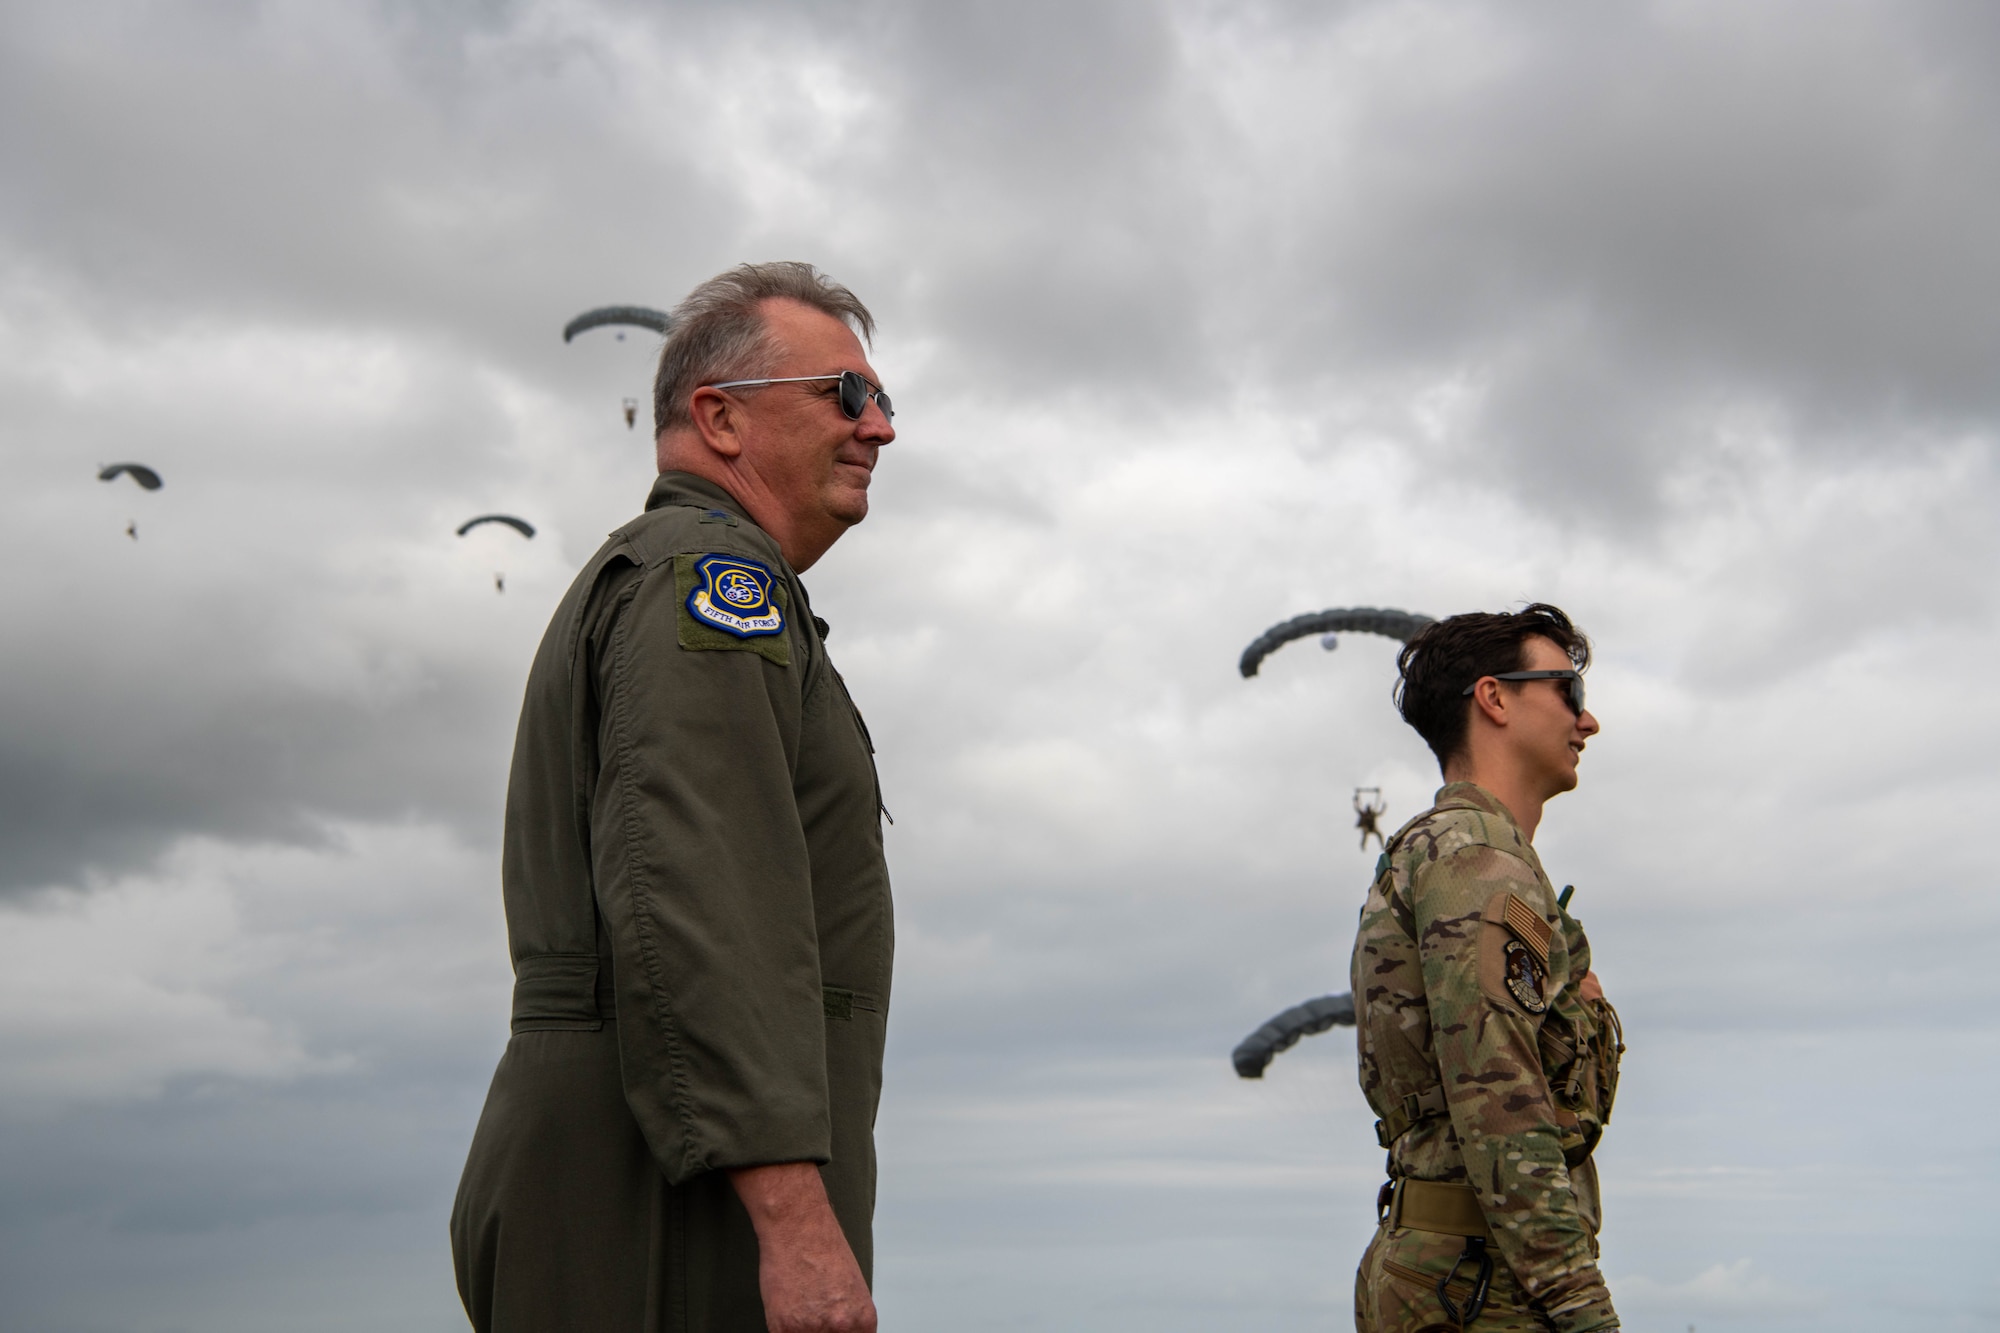 5th Air Force leadership watches pararescuemen parachute in the sky.